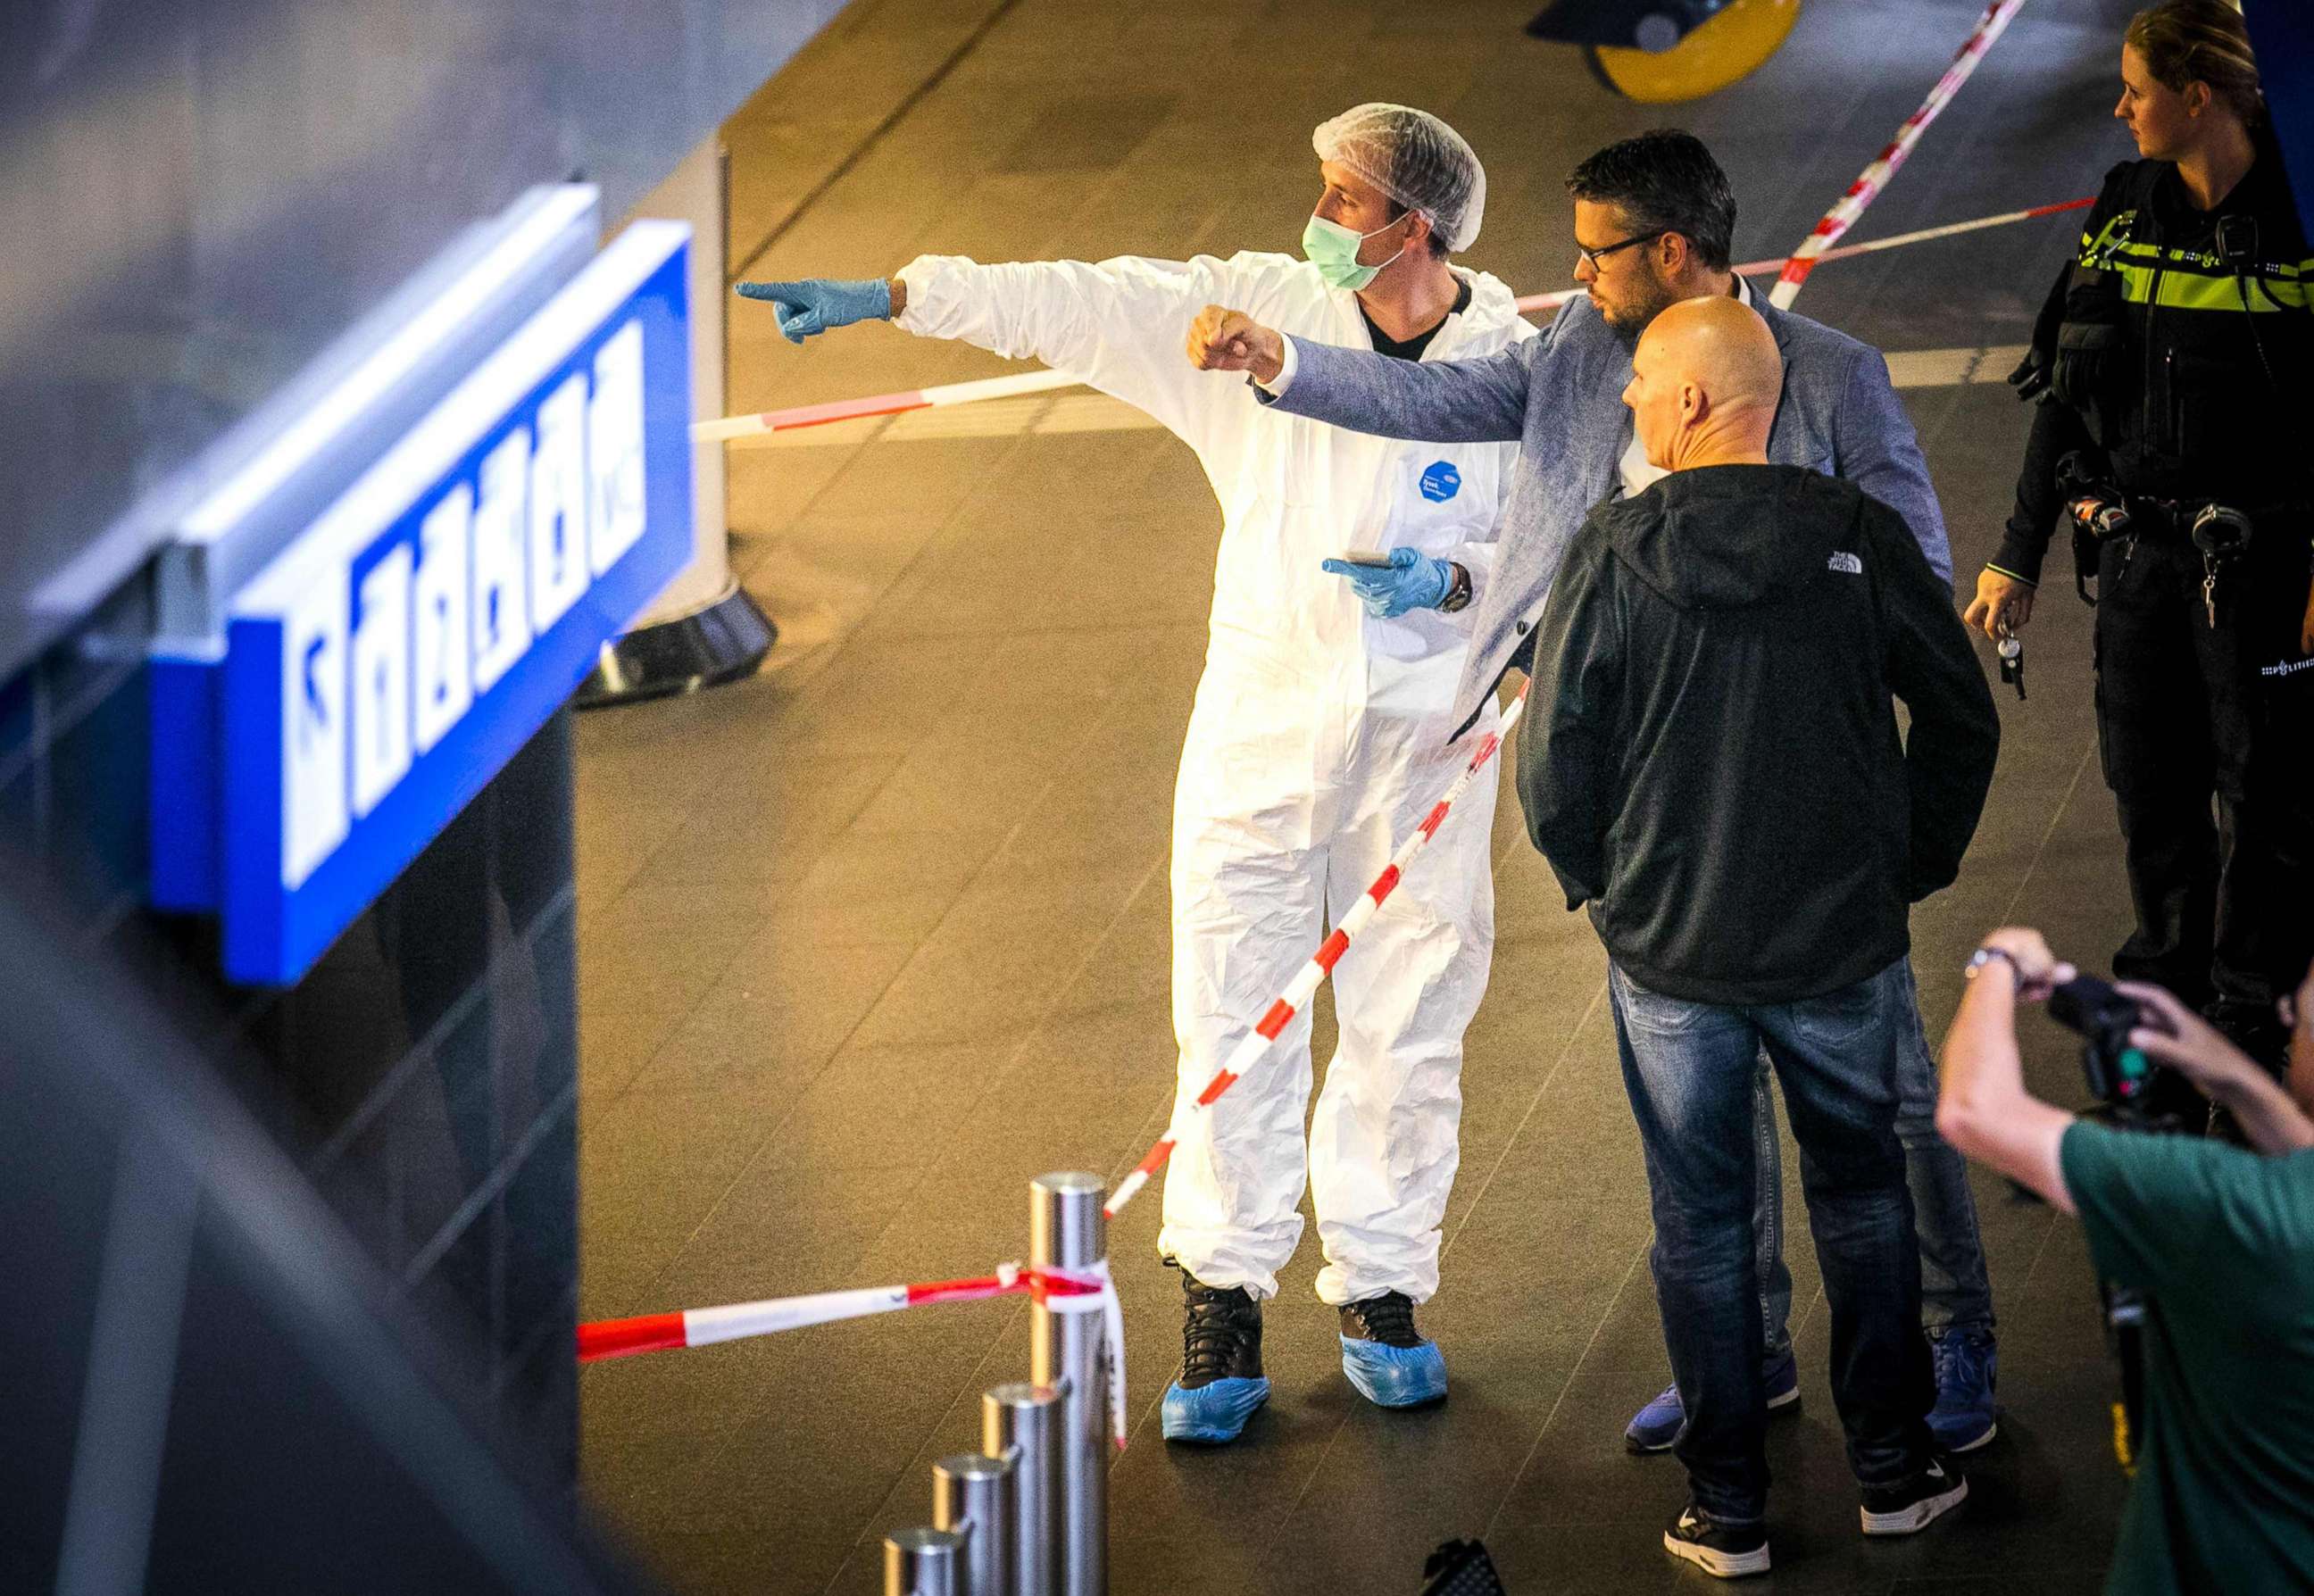 PHOTO: Policemen and forensics are at work after a stabbing incident at the central station in Amsterdam, Aug. 31, 2018.